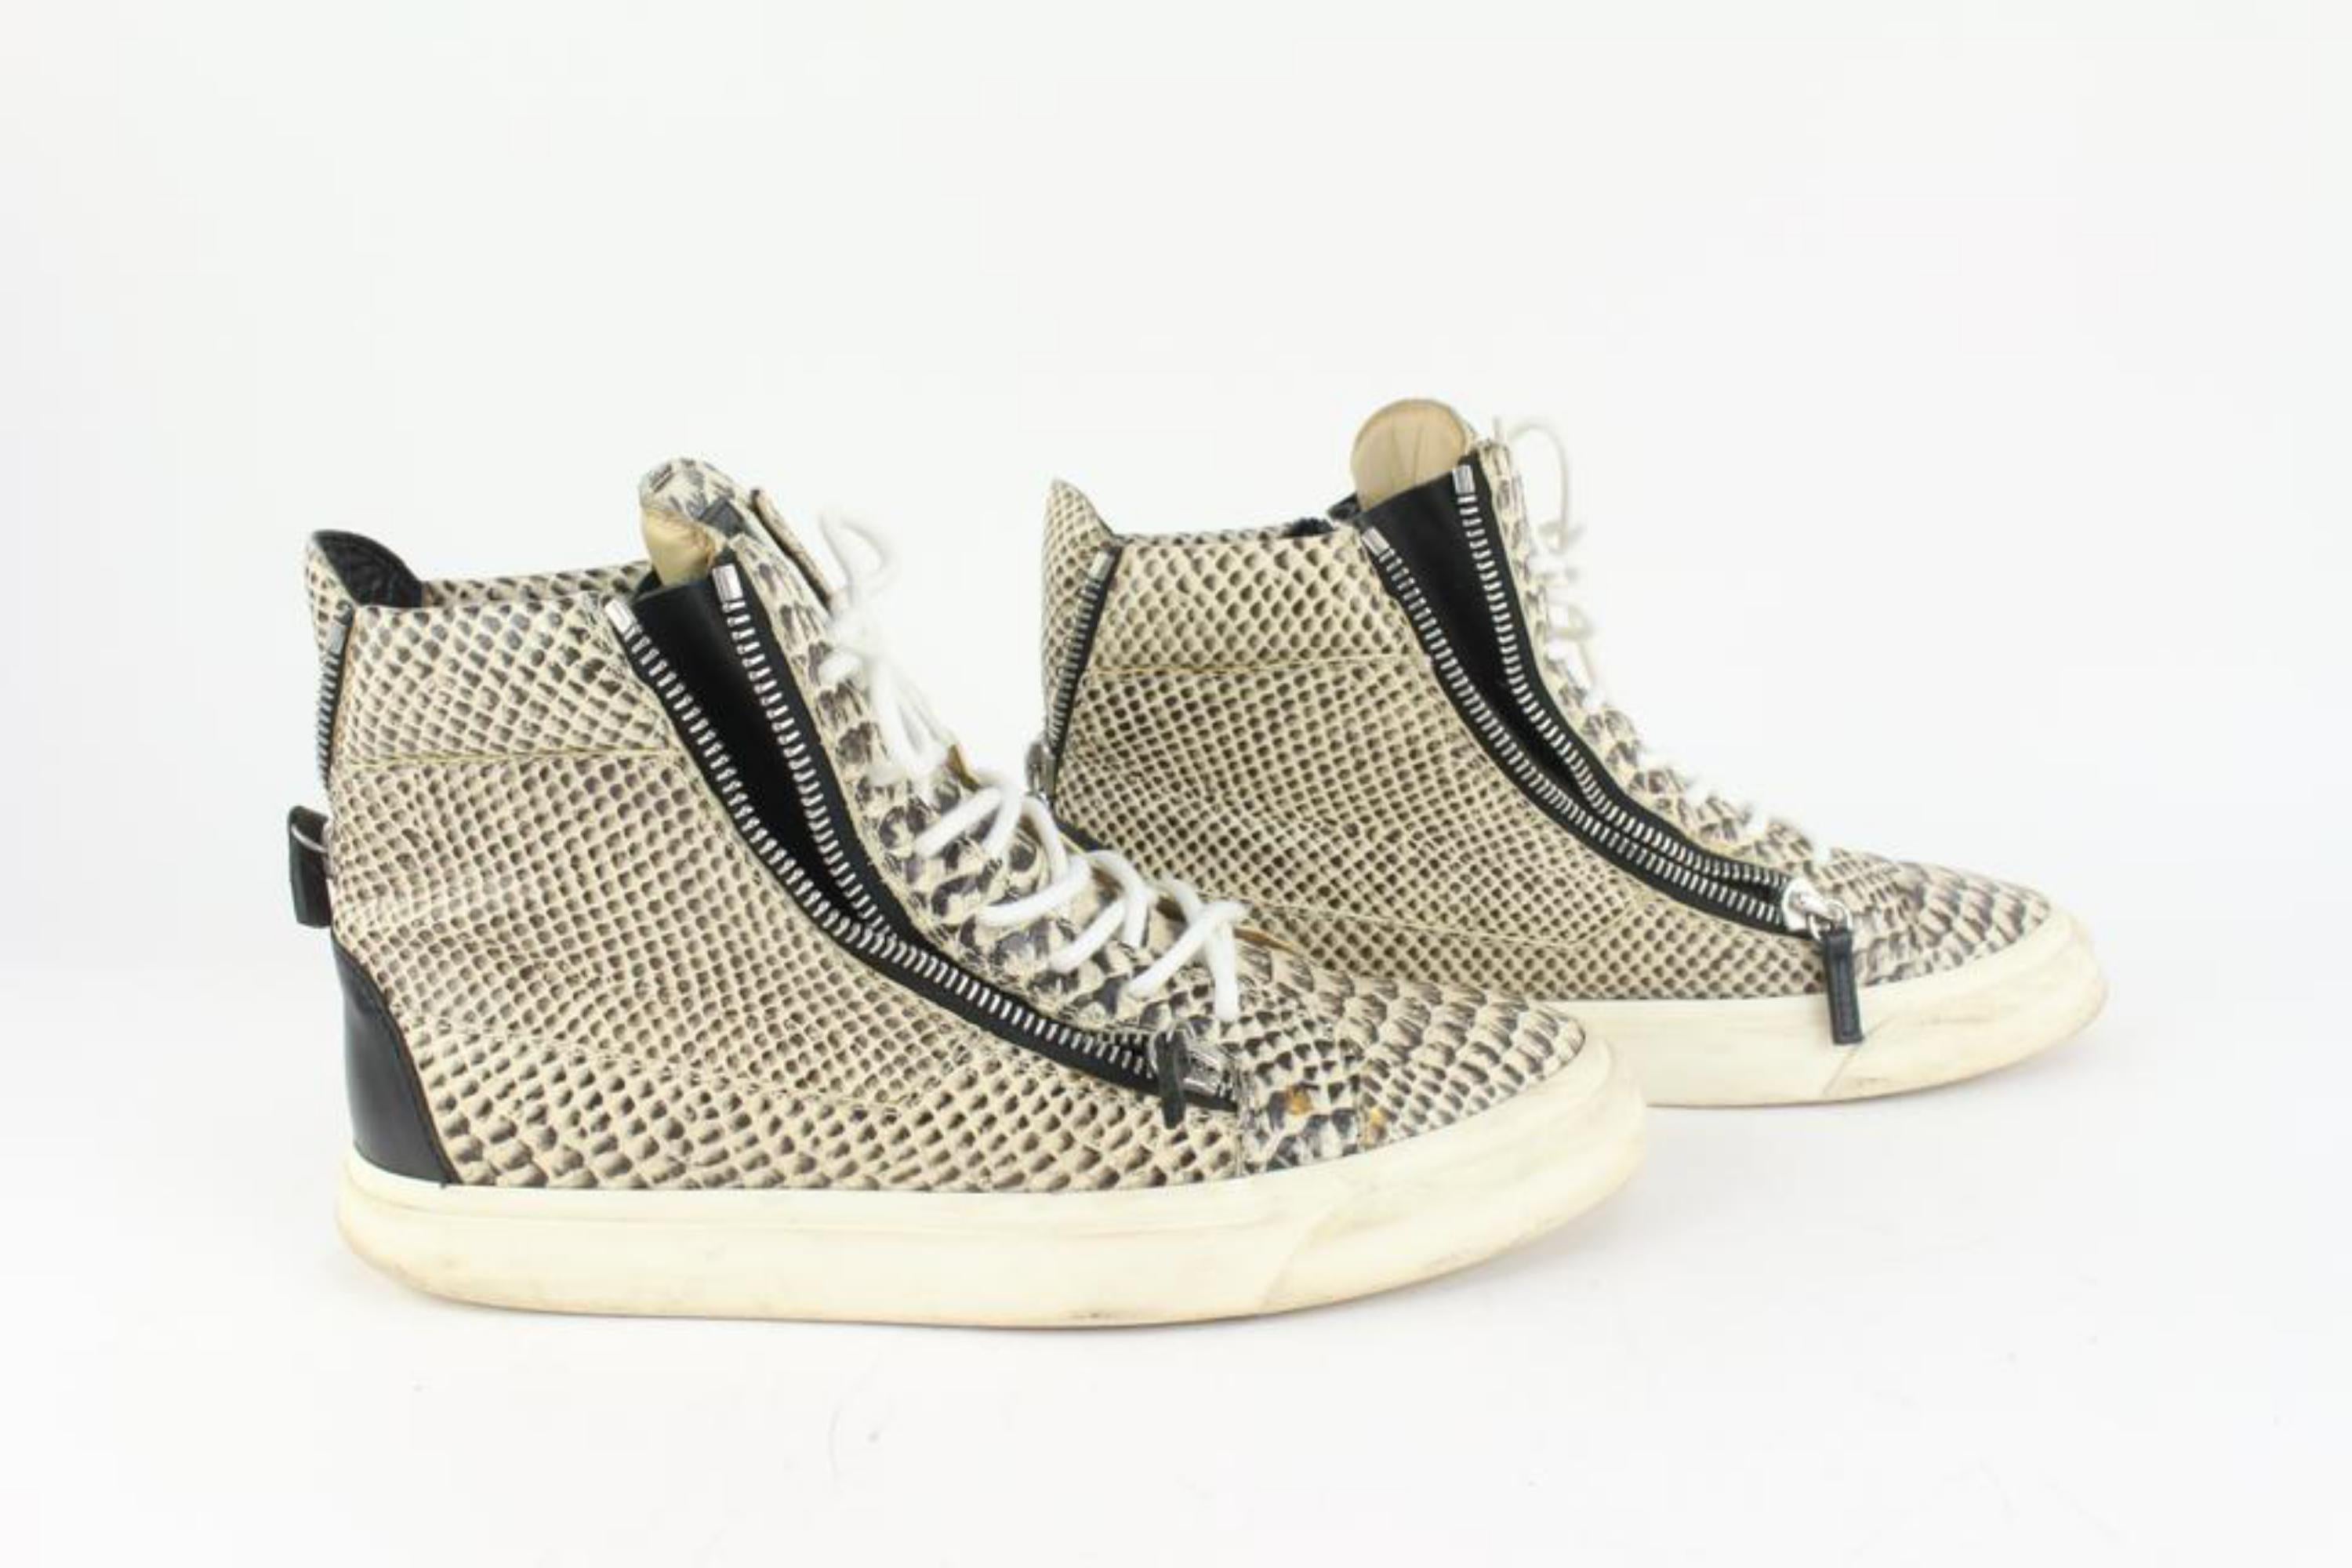 Giuseppe Zanotti Men's Size 43.5 Snake Print May London High Top Sneaker 1216gz1 In Good Condition For Sale In Dix hills, NY